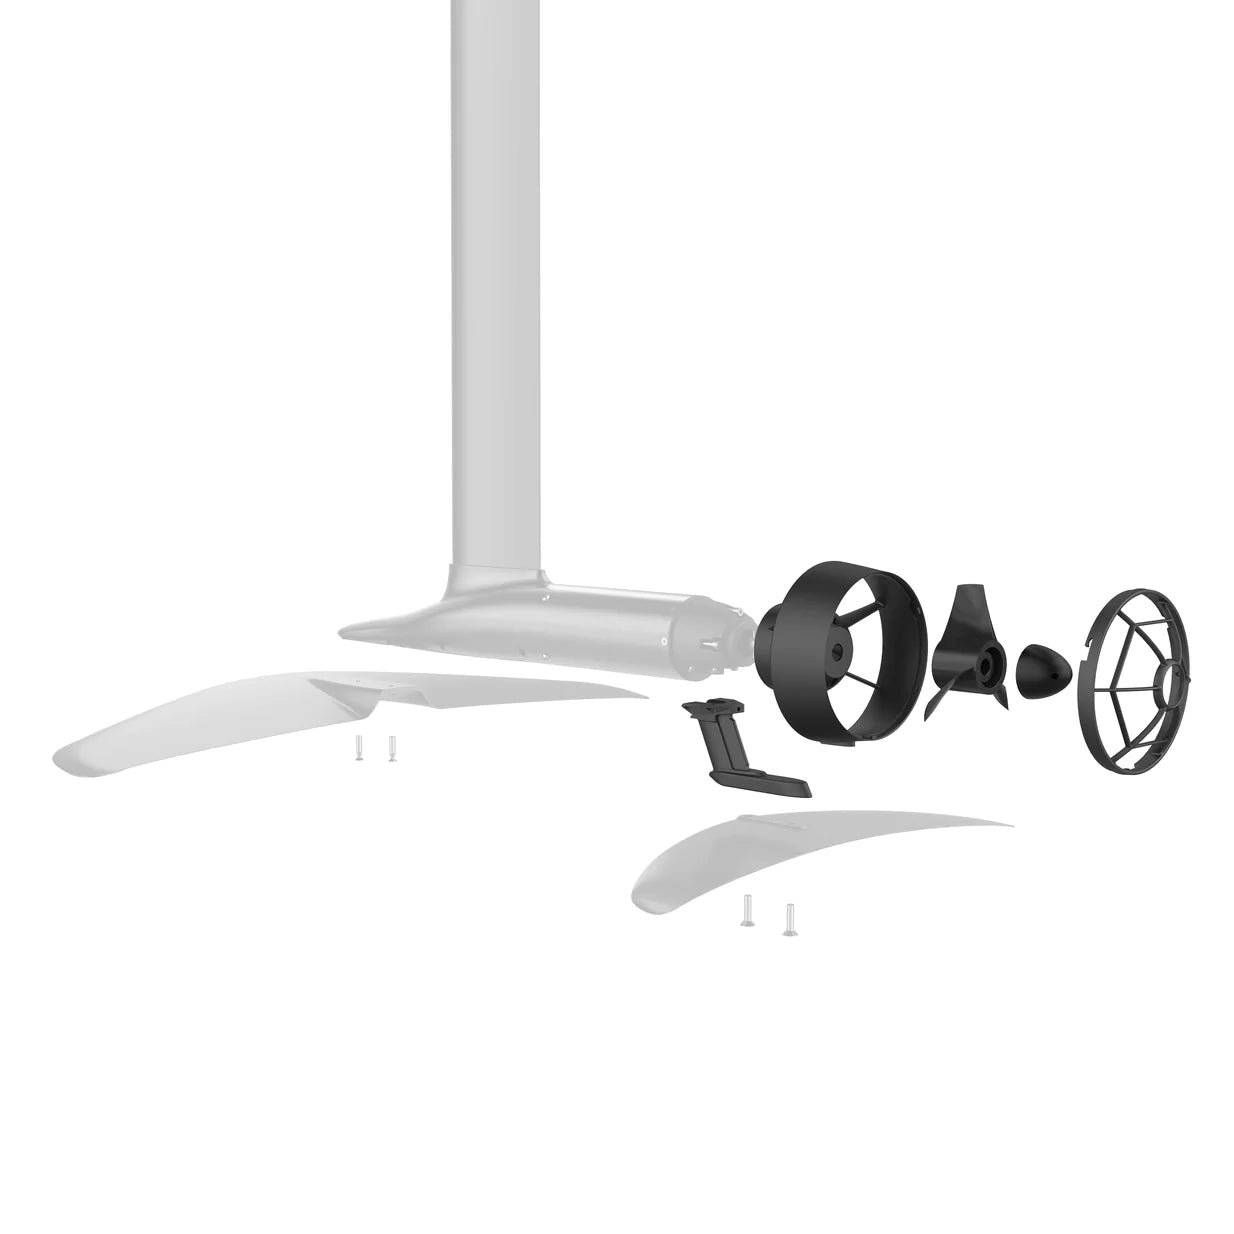 Propeller Kit Upgrade - FP7 and FP8